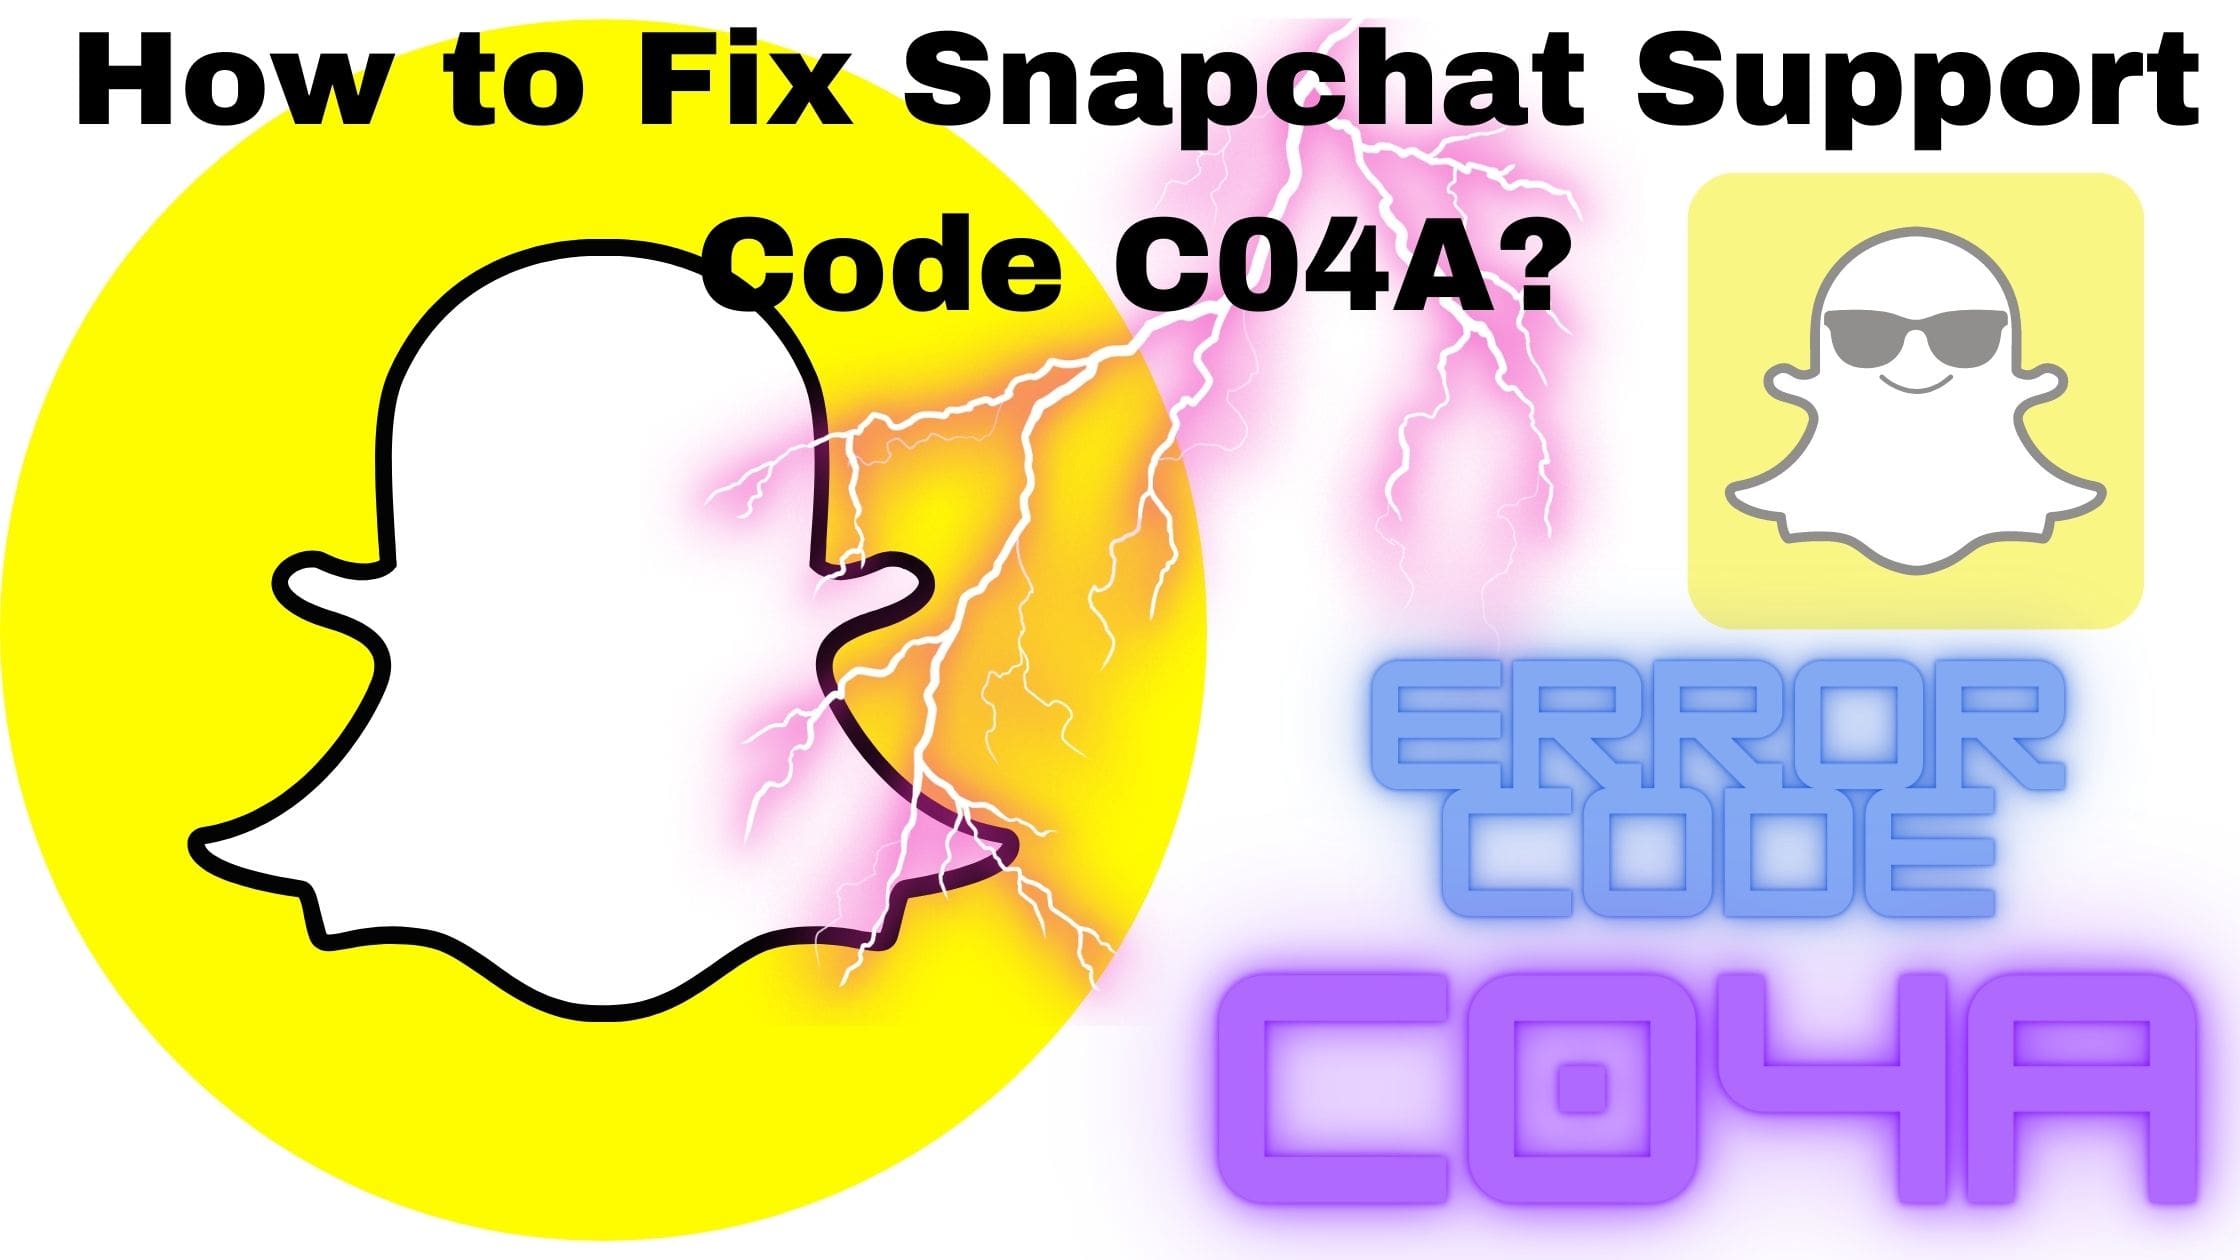 How to Fix Snapchat Support Code C04A